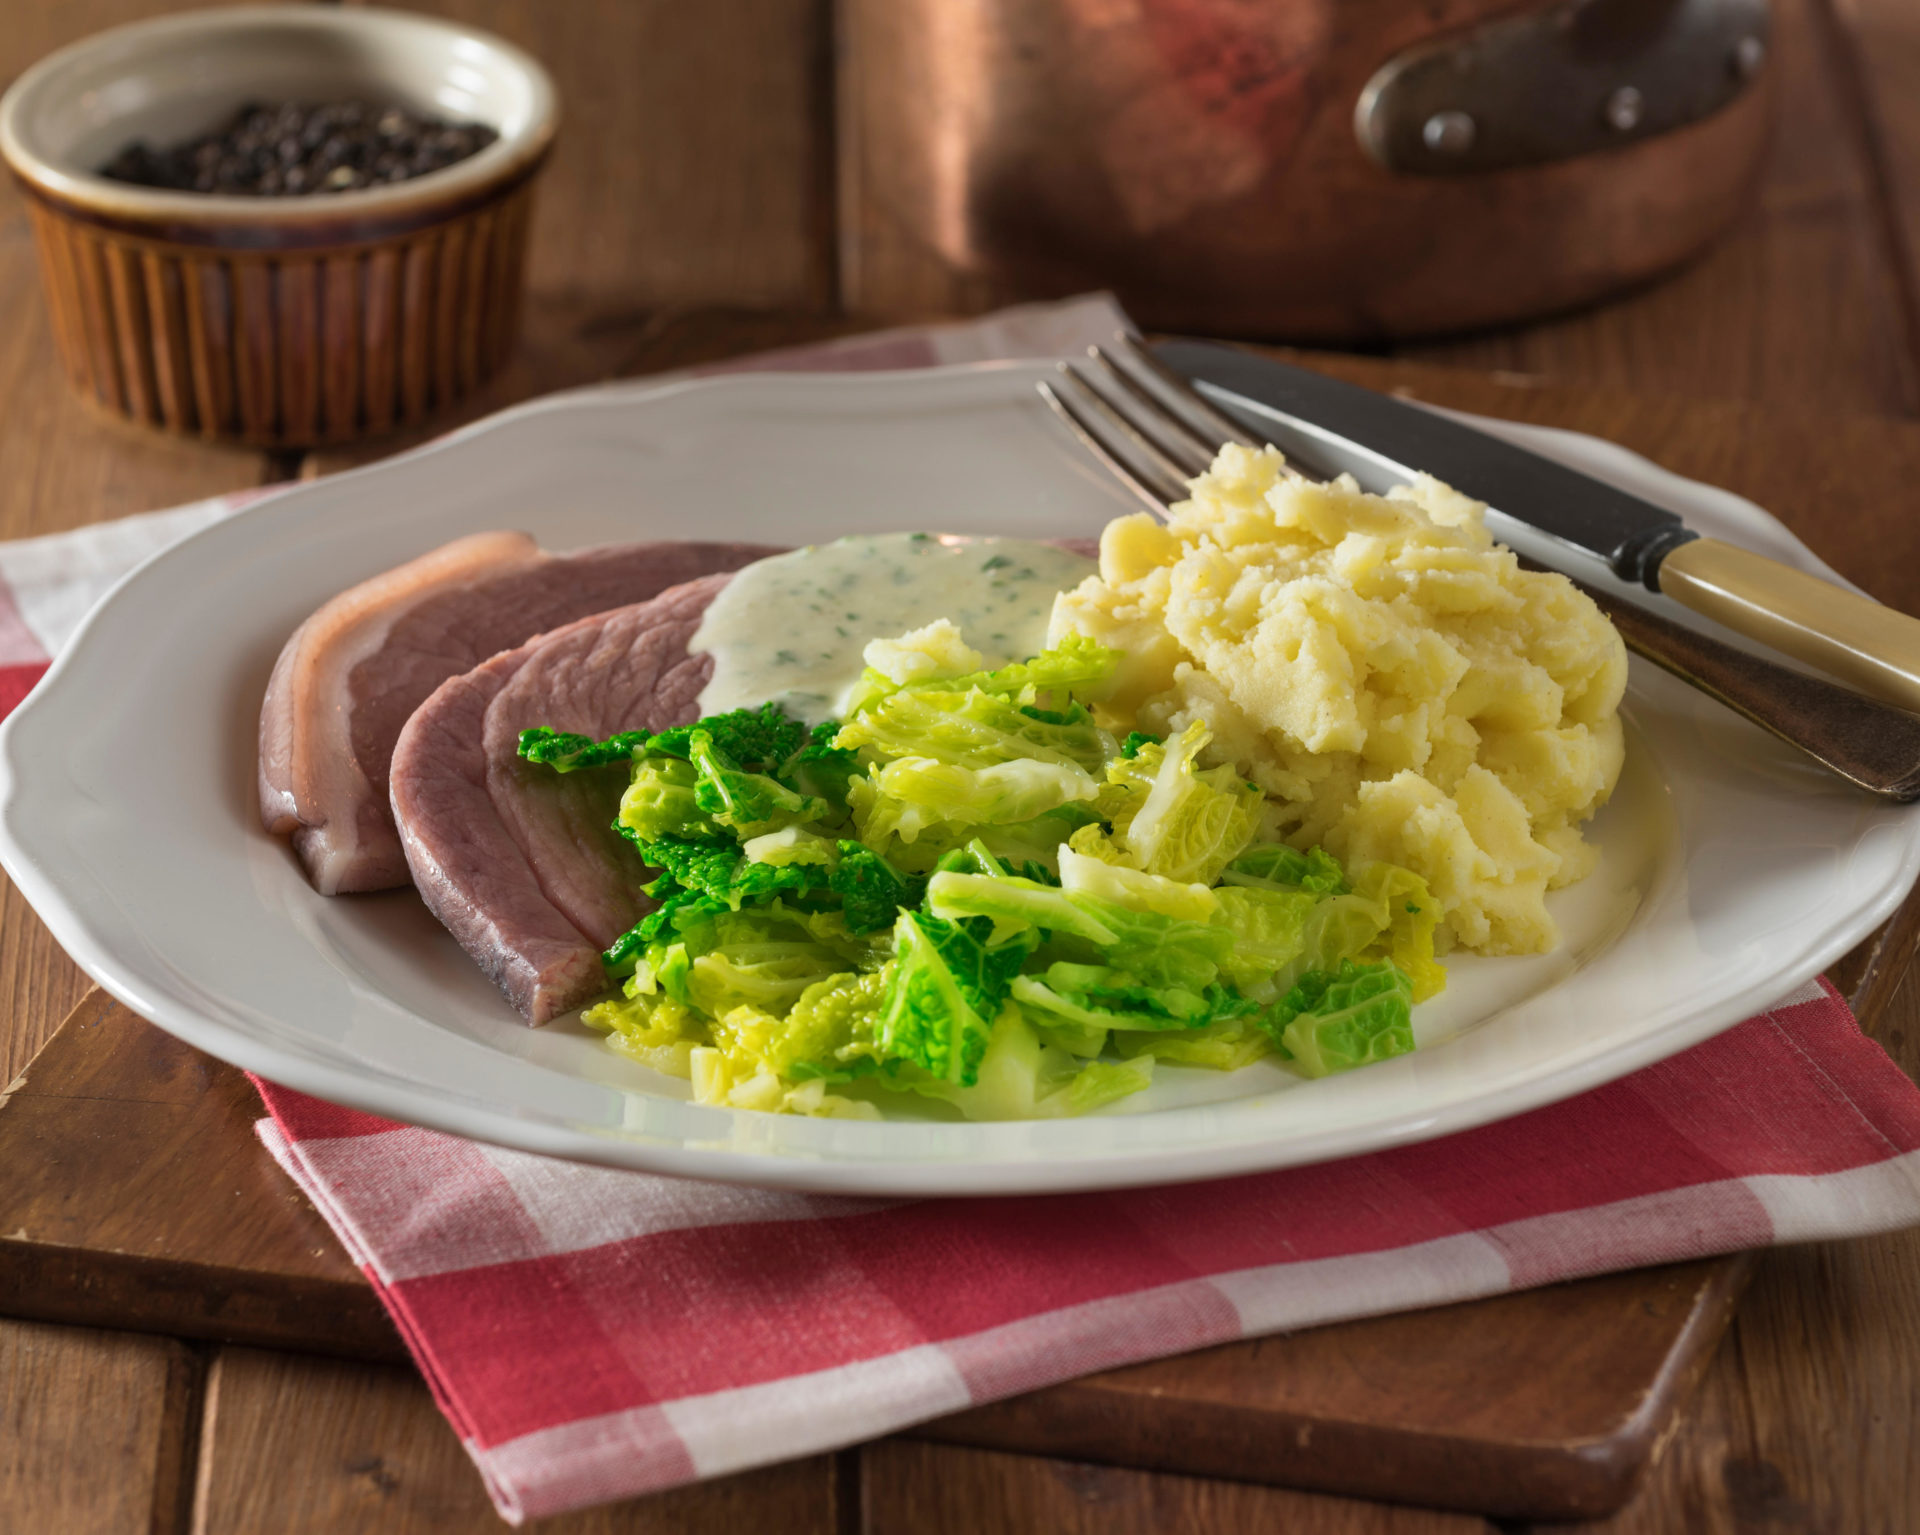 Irish bacon and cabbage with parsley sauce.